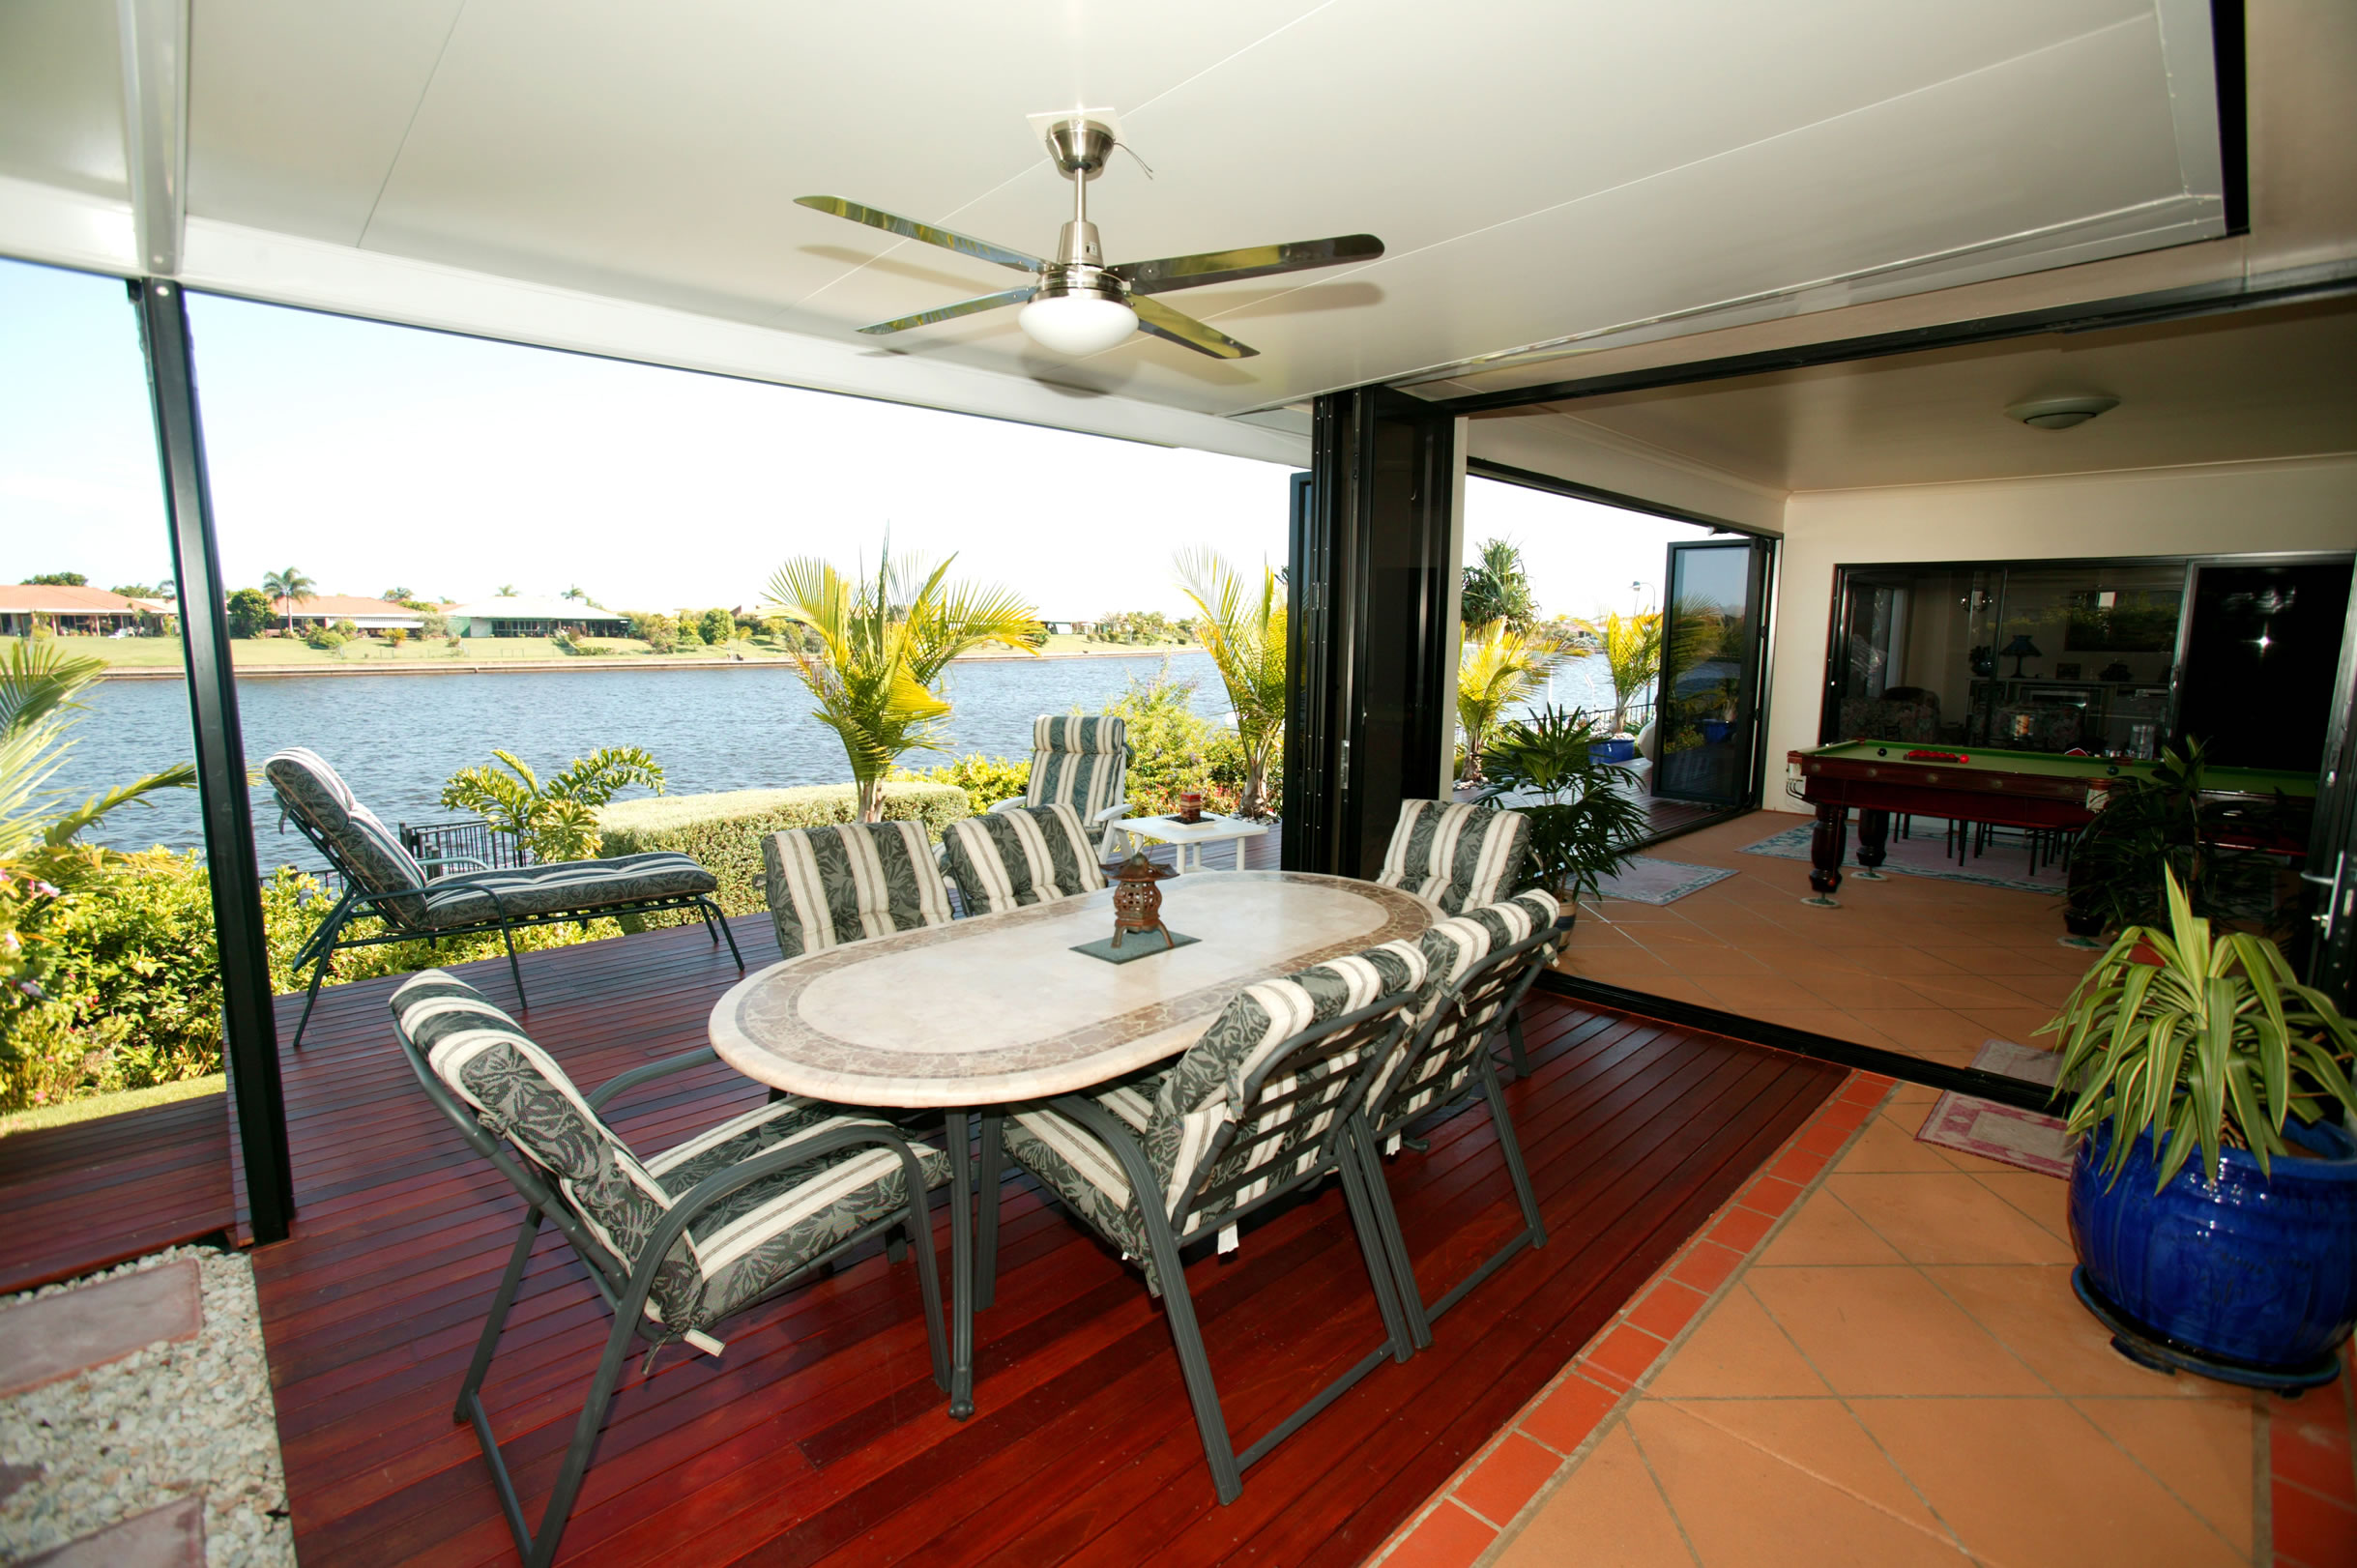 Coastal Patios insulated over timber deck on waterway with fan and light